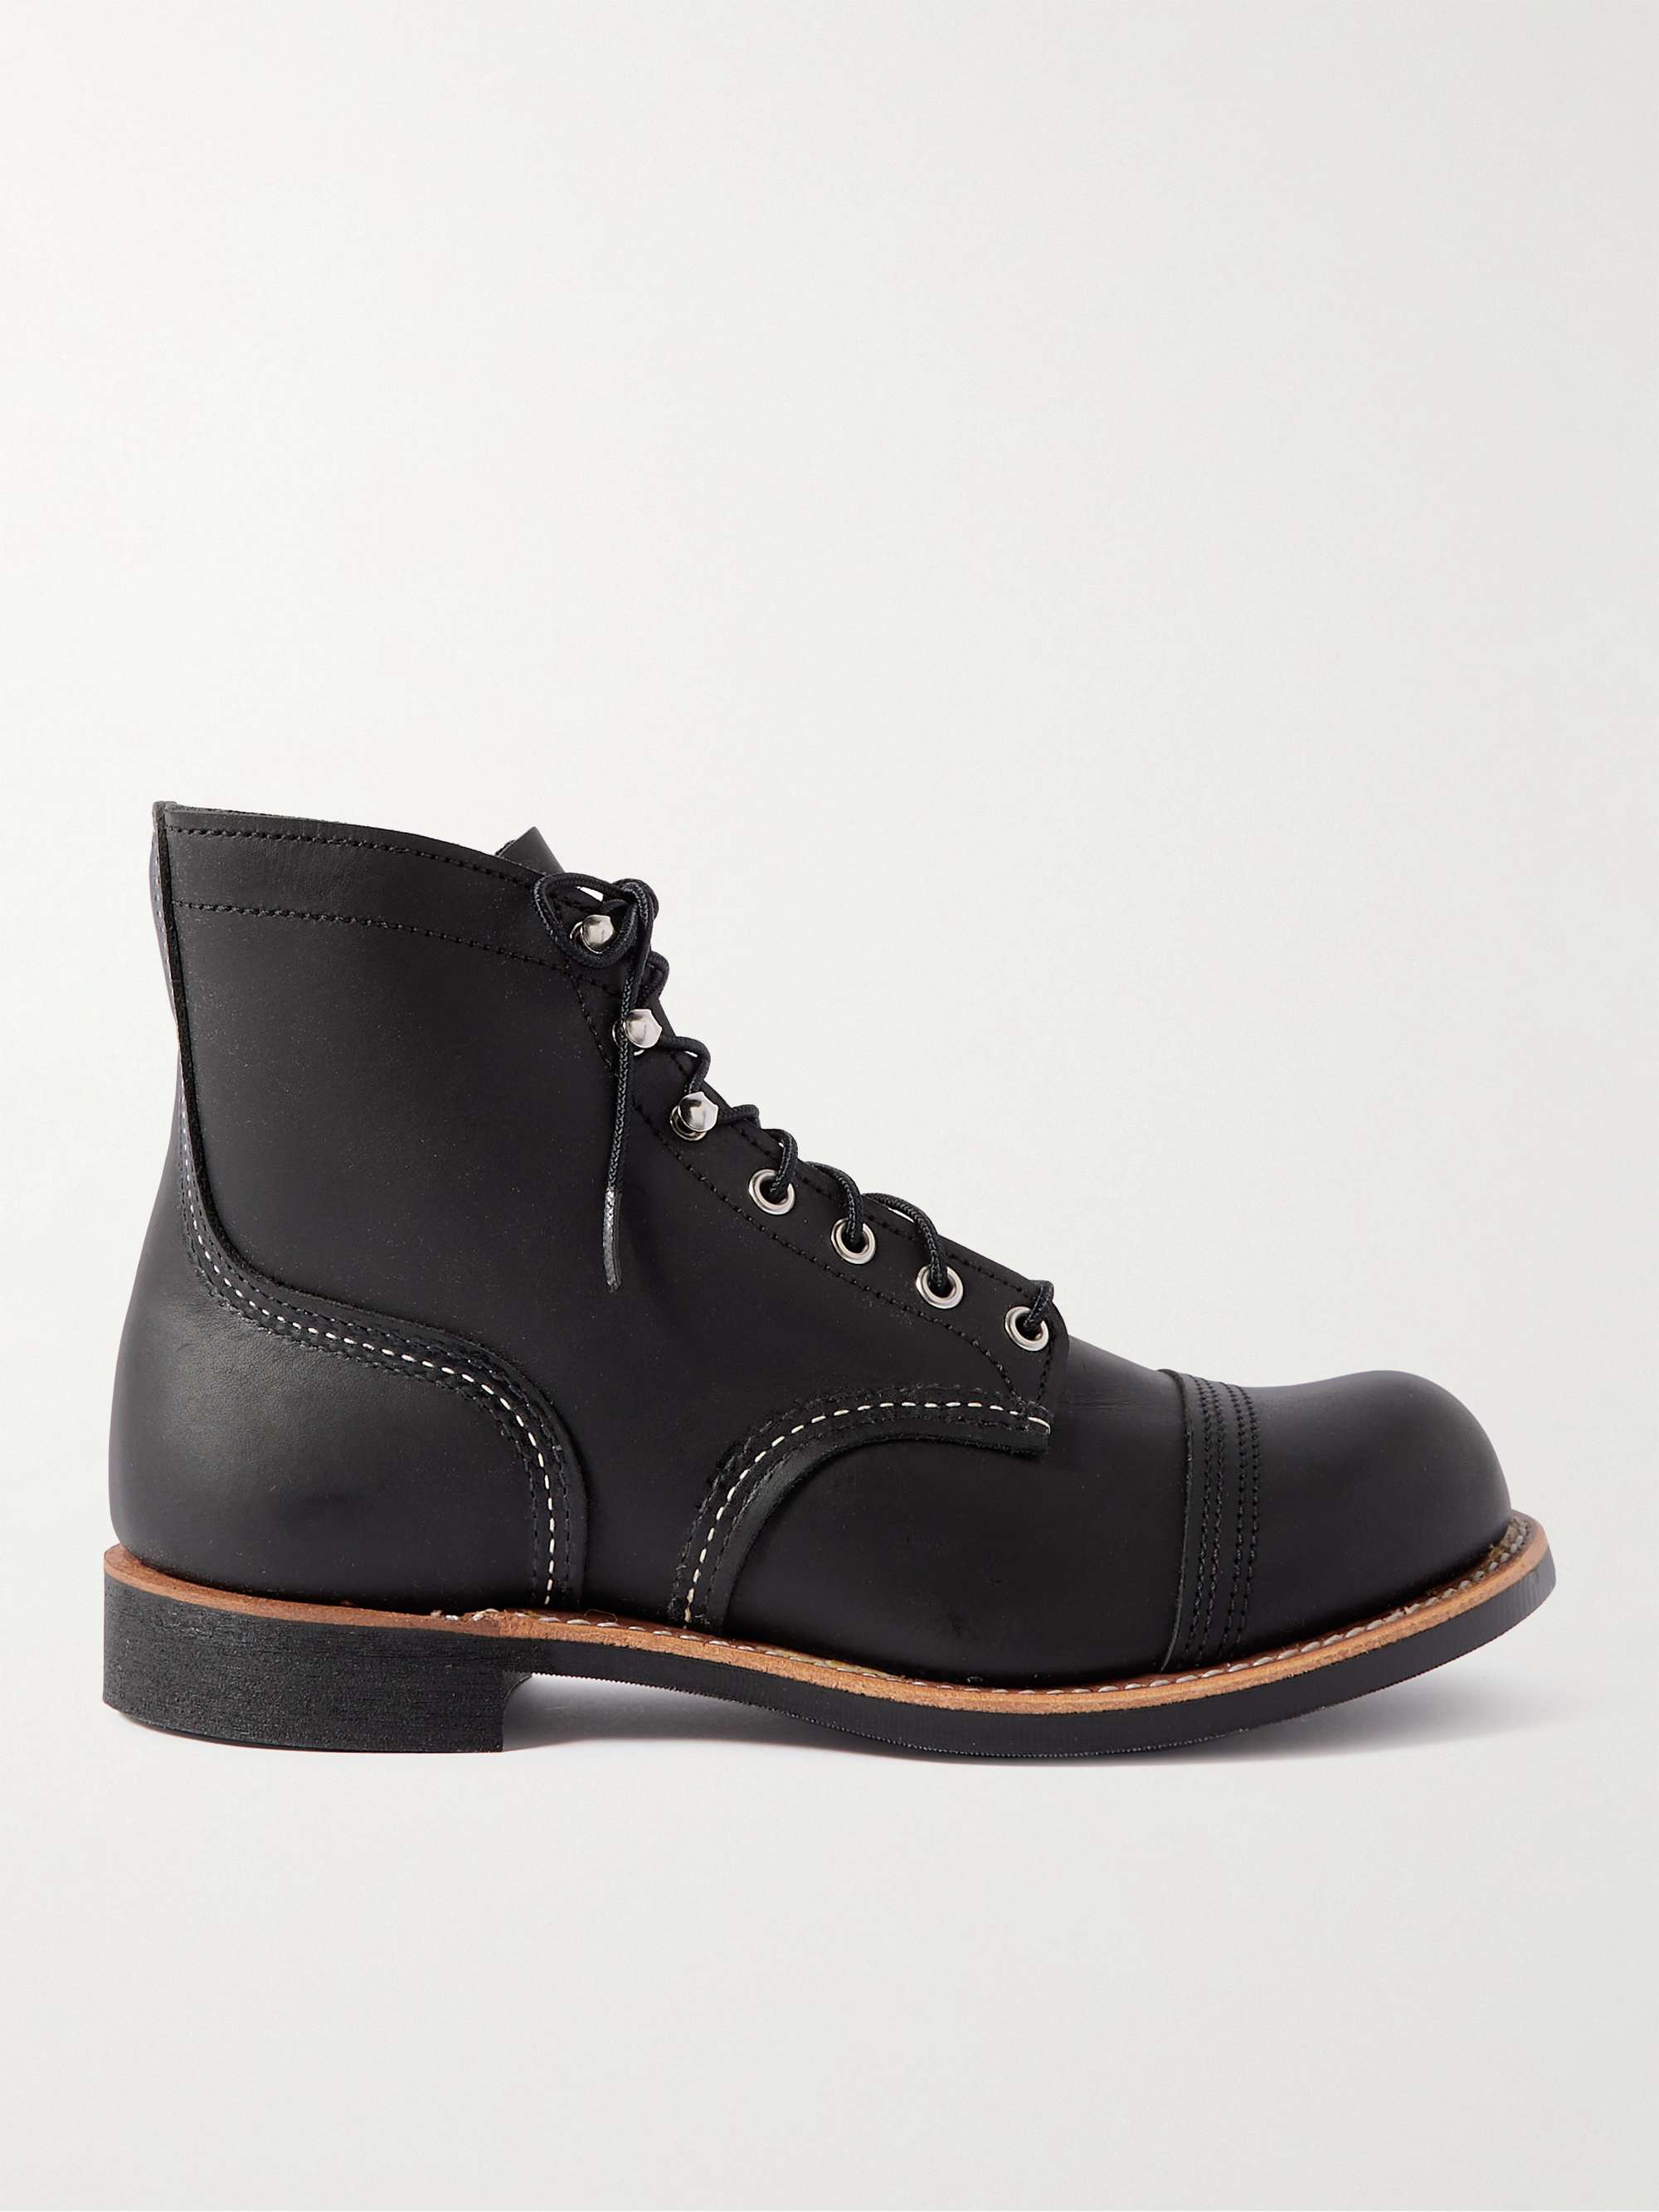 Black 8084 Iron Ranger Leather Boots | RED WING SHOES | MR PORTER